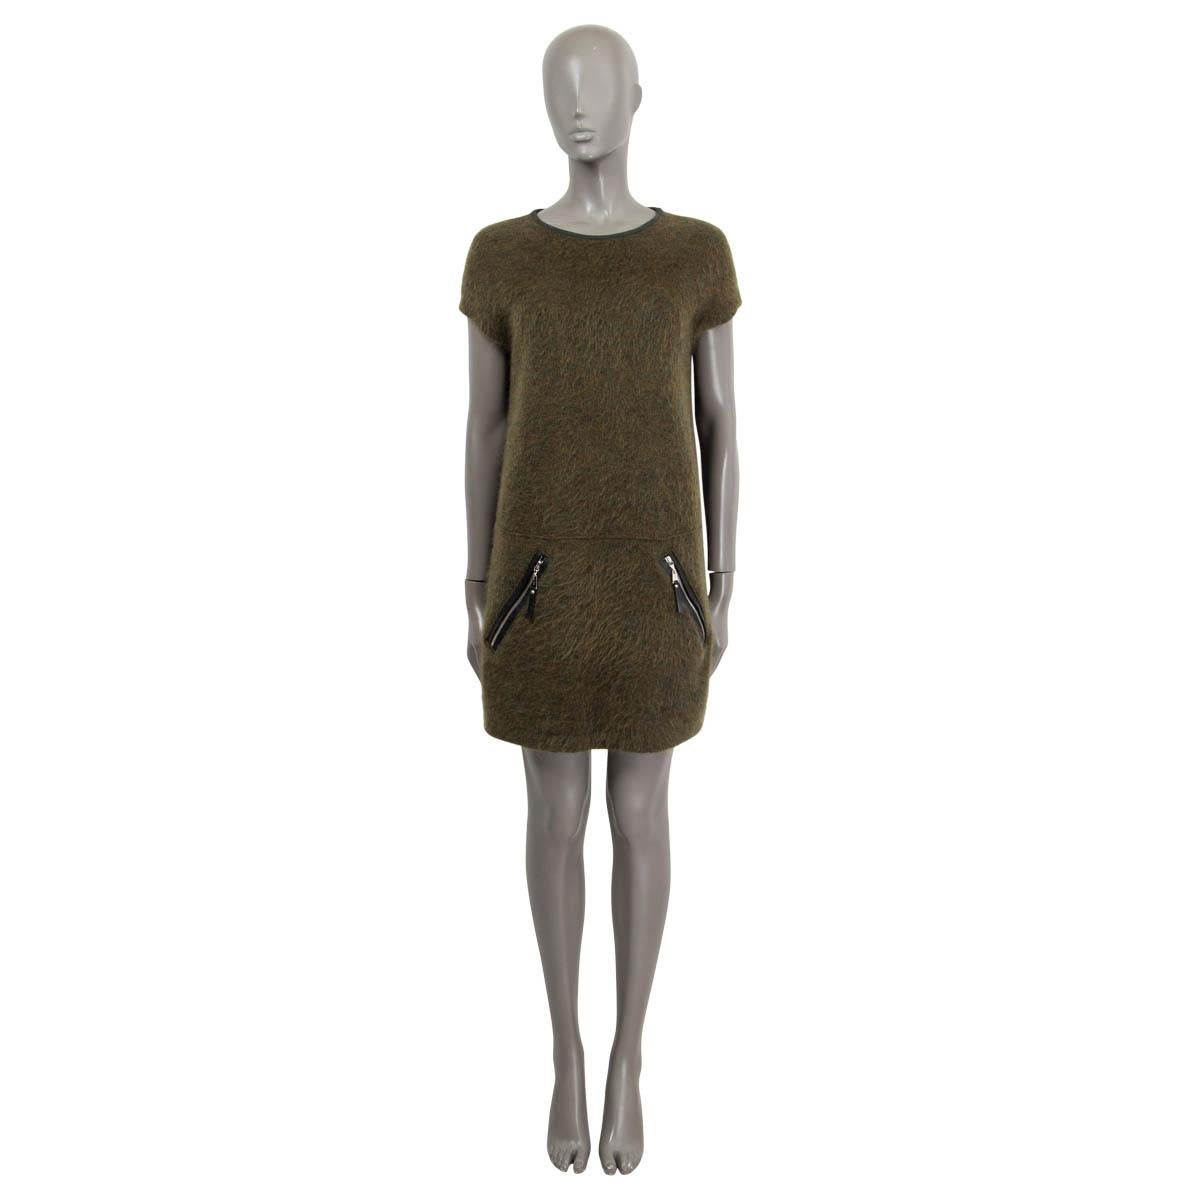 100% authentic Louis Vuitton short sleeve dress in olive green wool (40%), mohair (25%), viscose (20%) and polyamide (15%) with two front zip pockets with black lambskin trimming. Has been worn and is in excellent condition. 

Measurements
Tag